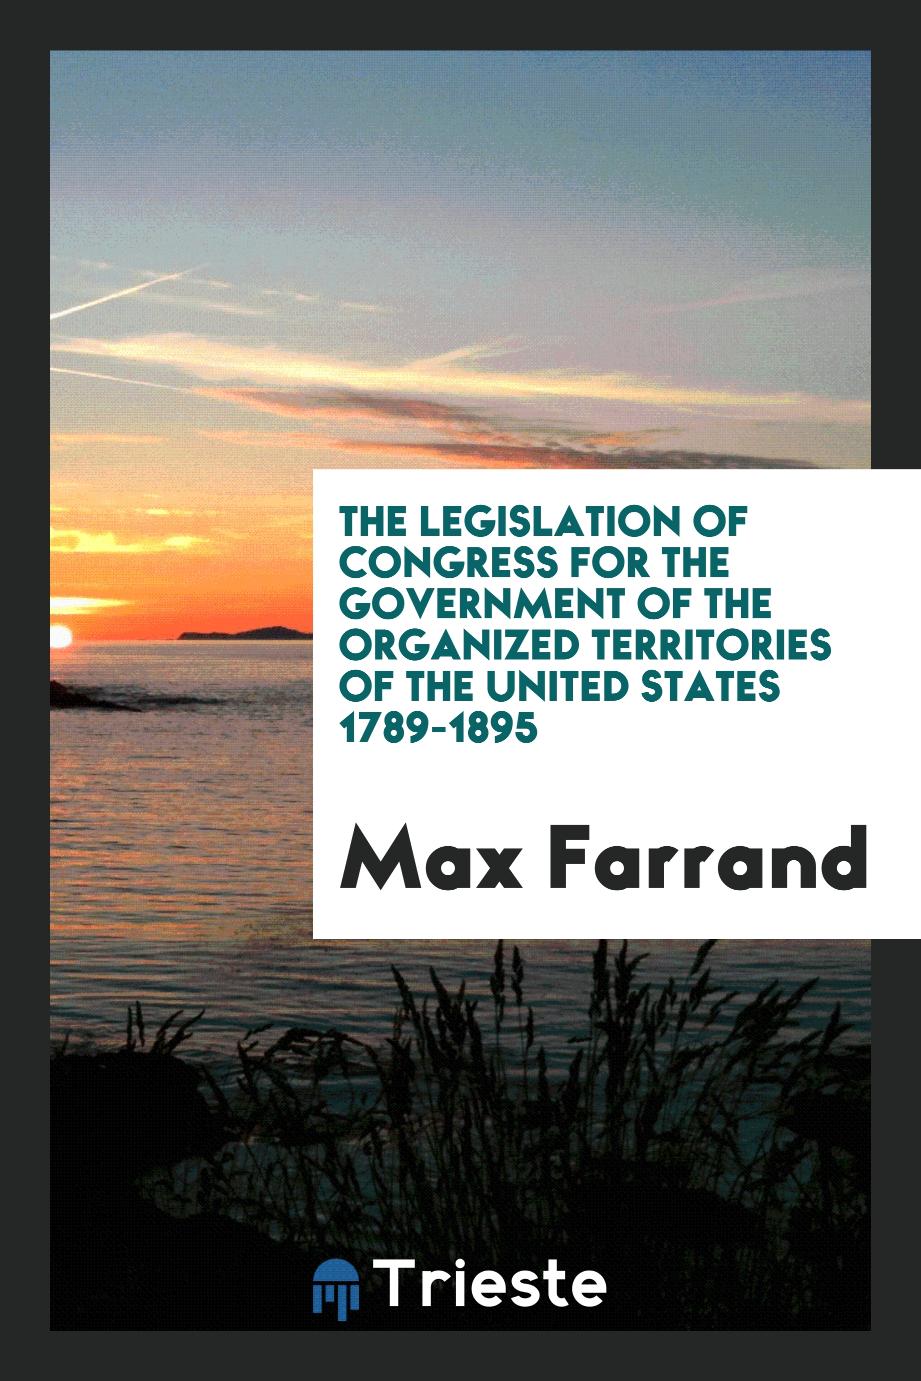 The Legislation of Congress for the Government of the Organized Territories of the United States 1789-1895